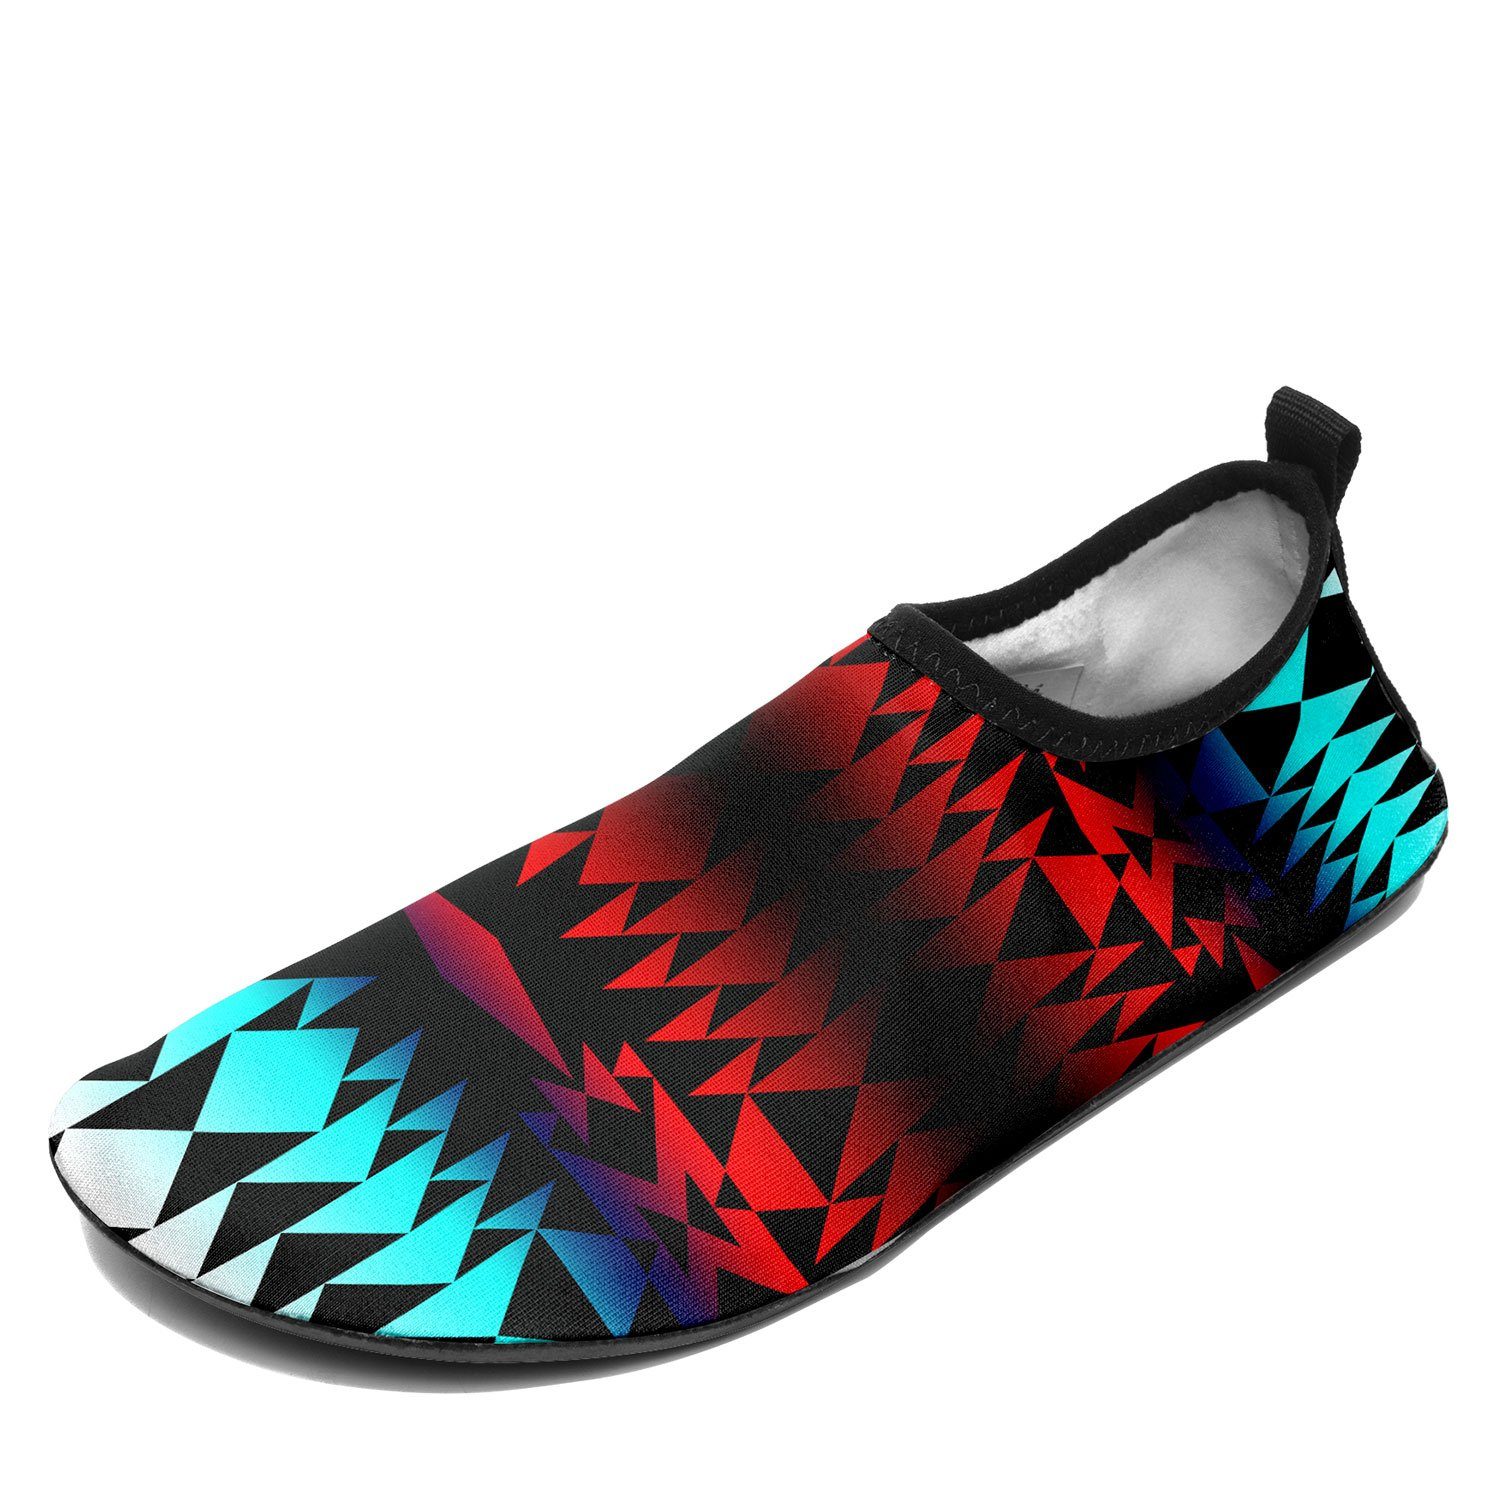 In Between Two Worlds Sockamoccs Kid's Slip On Shoes Herman 